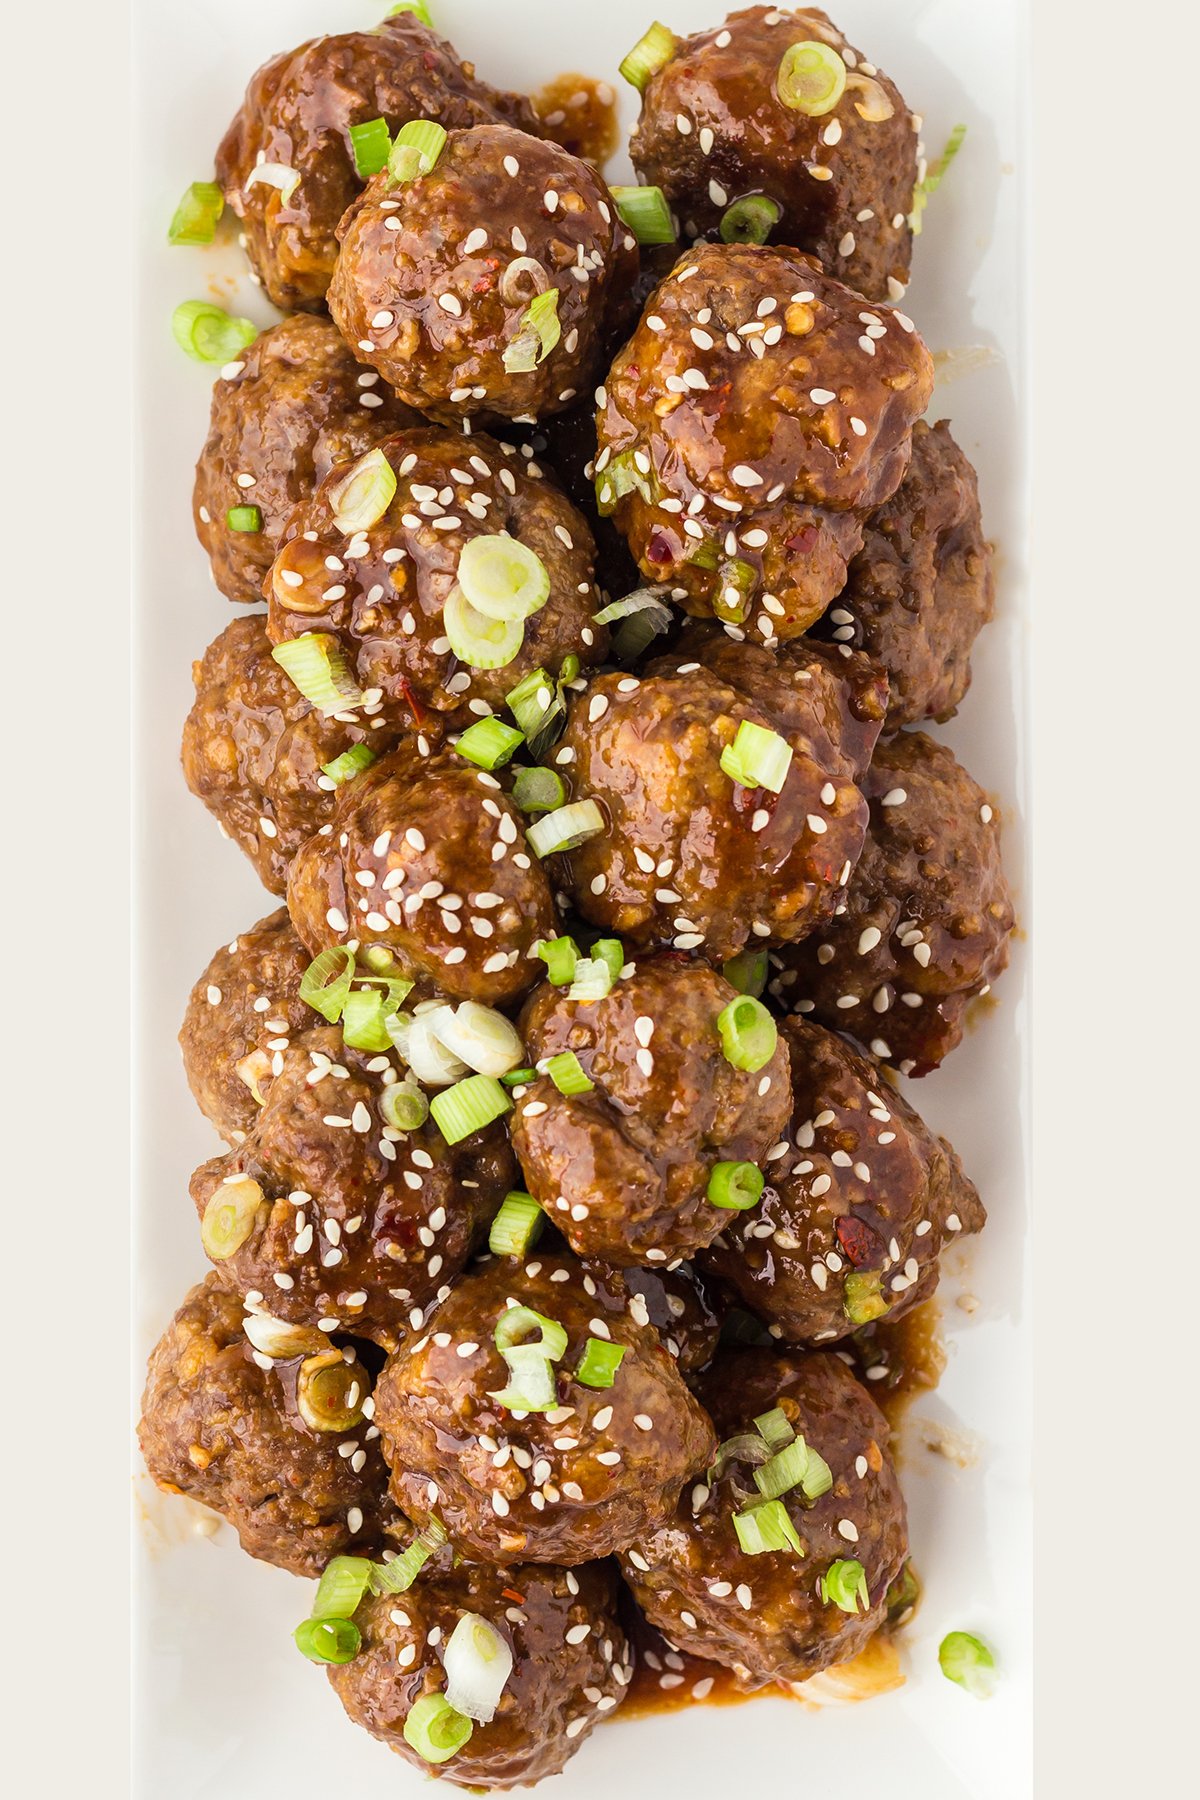 A white rectangular serving platter filled with saucy Asian meatballs garnished with green onions and sesame seeds.